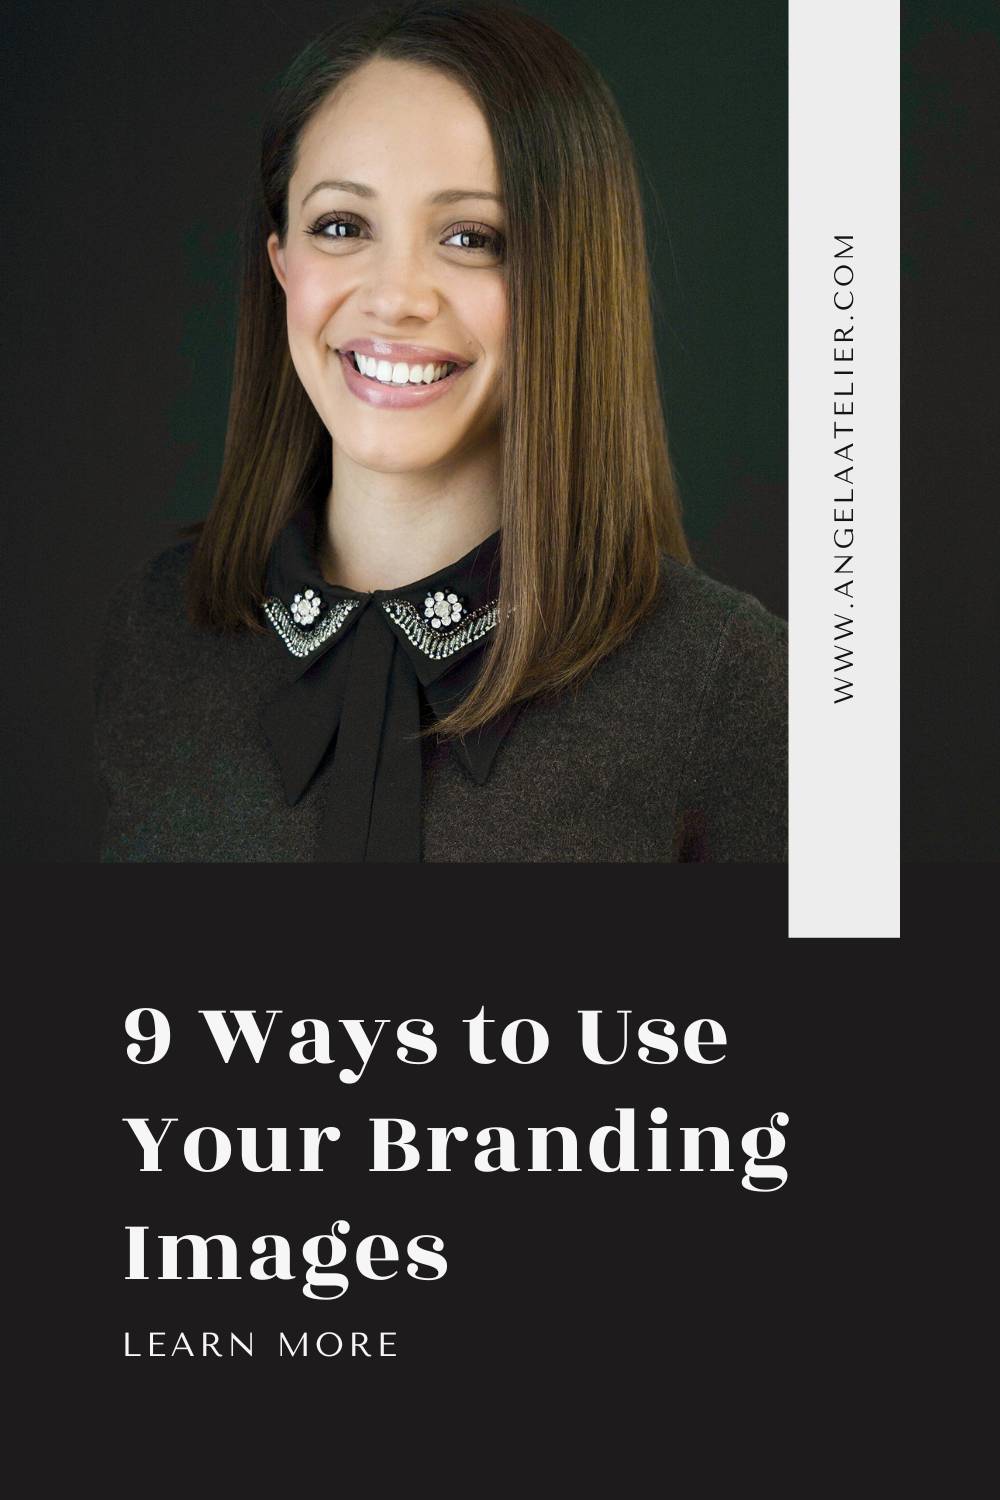 Ways to Use Your Branding Images